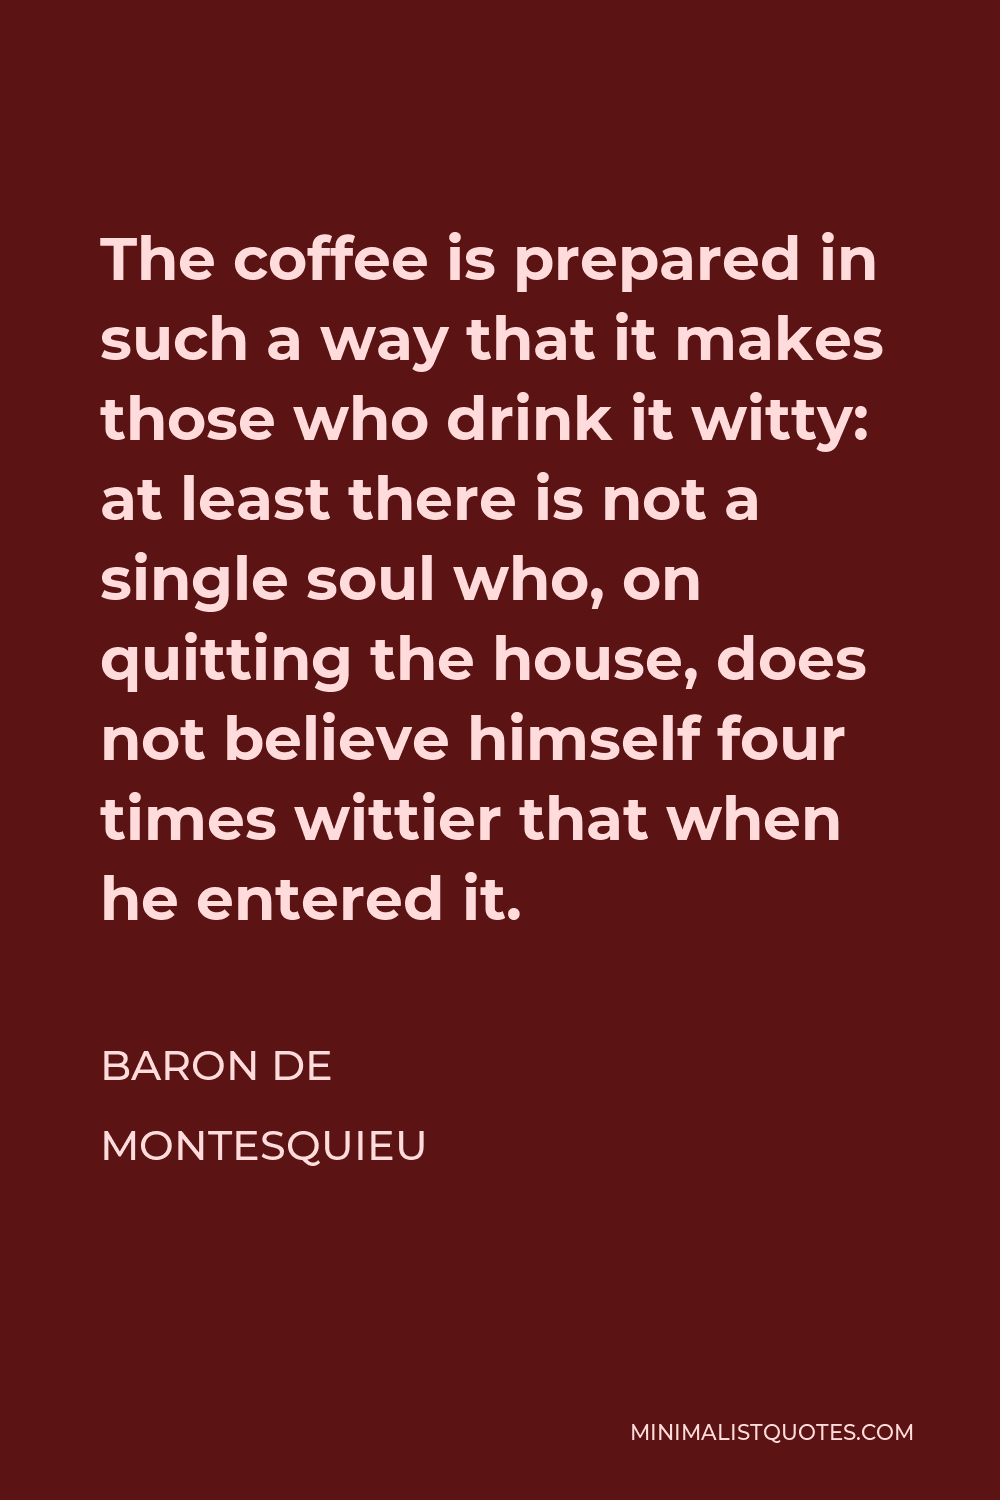 Baron de Montesquieu Quote - The coffee is prepared in such a way that it makes those who drink it witty: at least there is not a single soul who, on quitting the house, does not believe himself four times wittier that when he entered it.